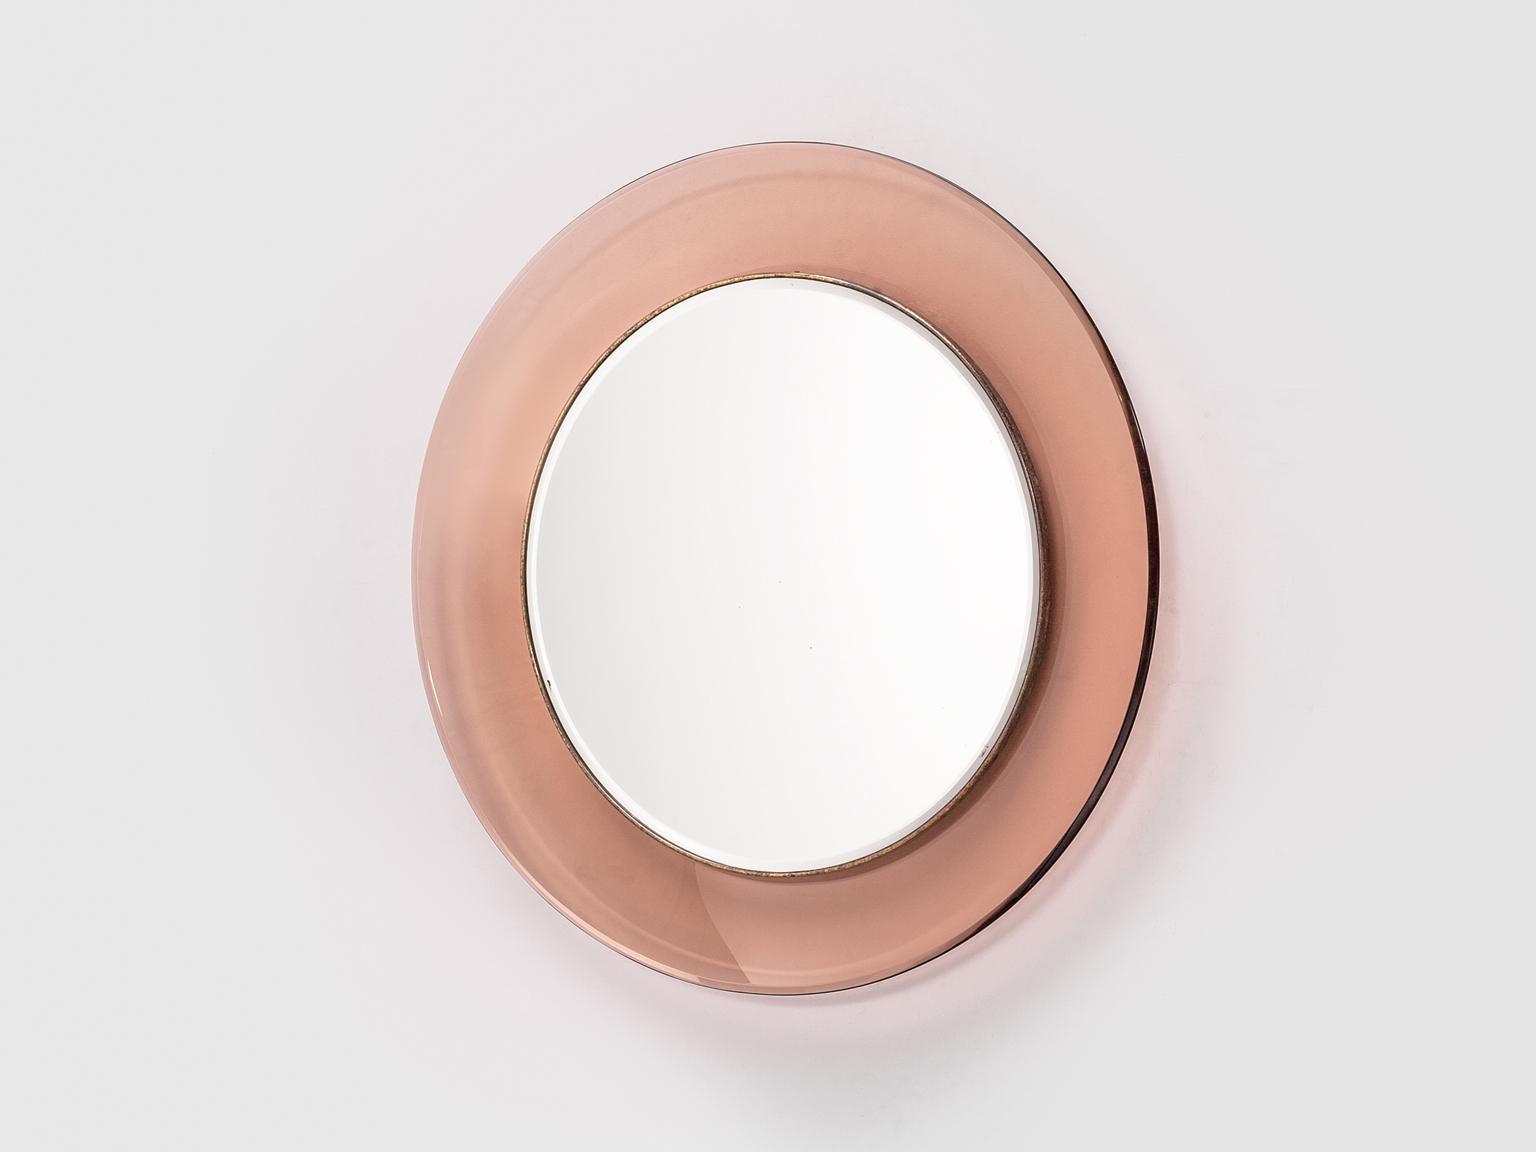 Max Ingrand for Fontana Arte round mirror model '1669', made in glass and mirror, Italy, 1964.

This round mirror is created by Max Ingrand who works a lot with glass. This beautiful mirror is surrounded by a transparent pink glass which is held